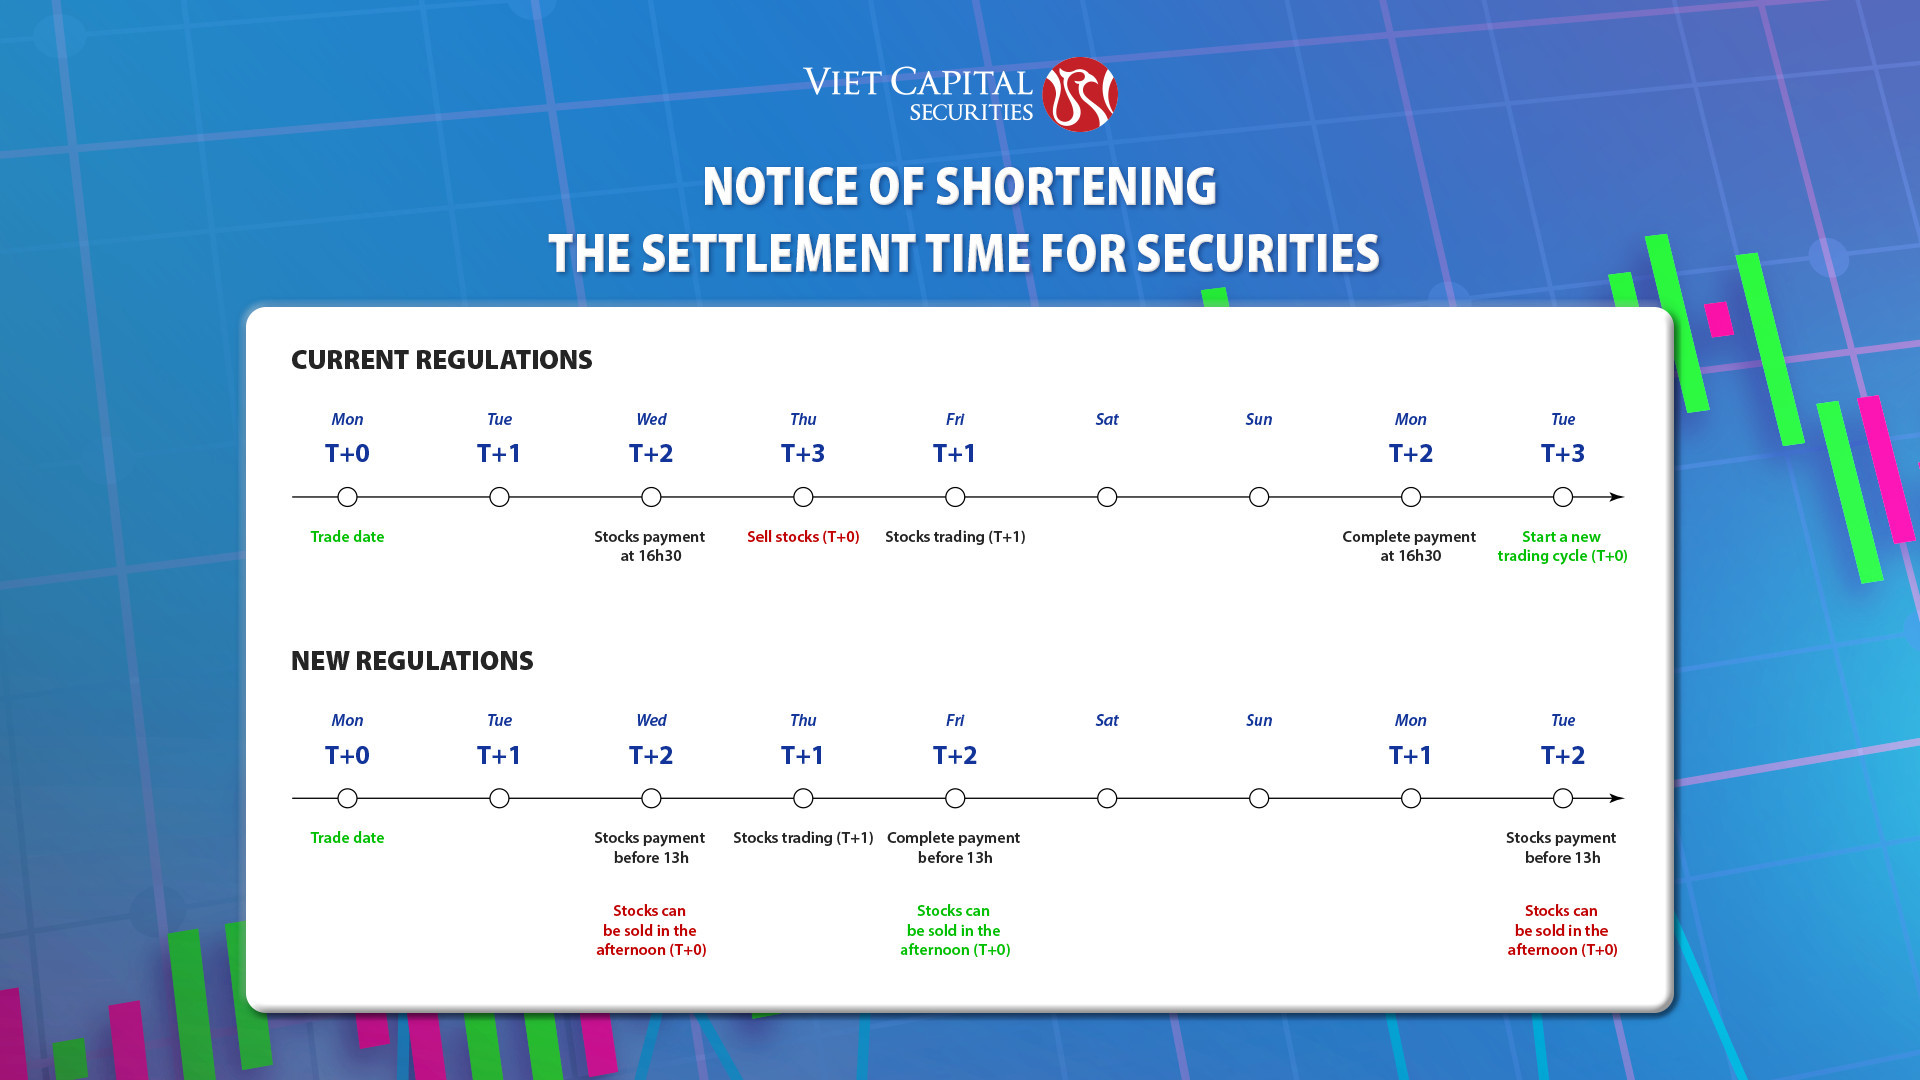 Notice of shortening the settlement time for securities